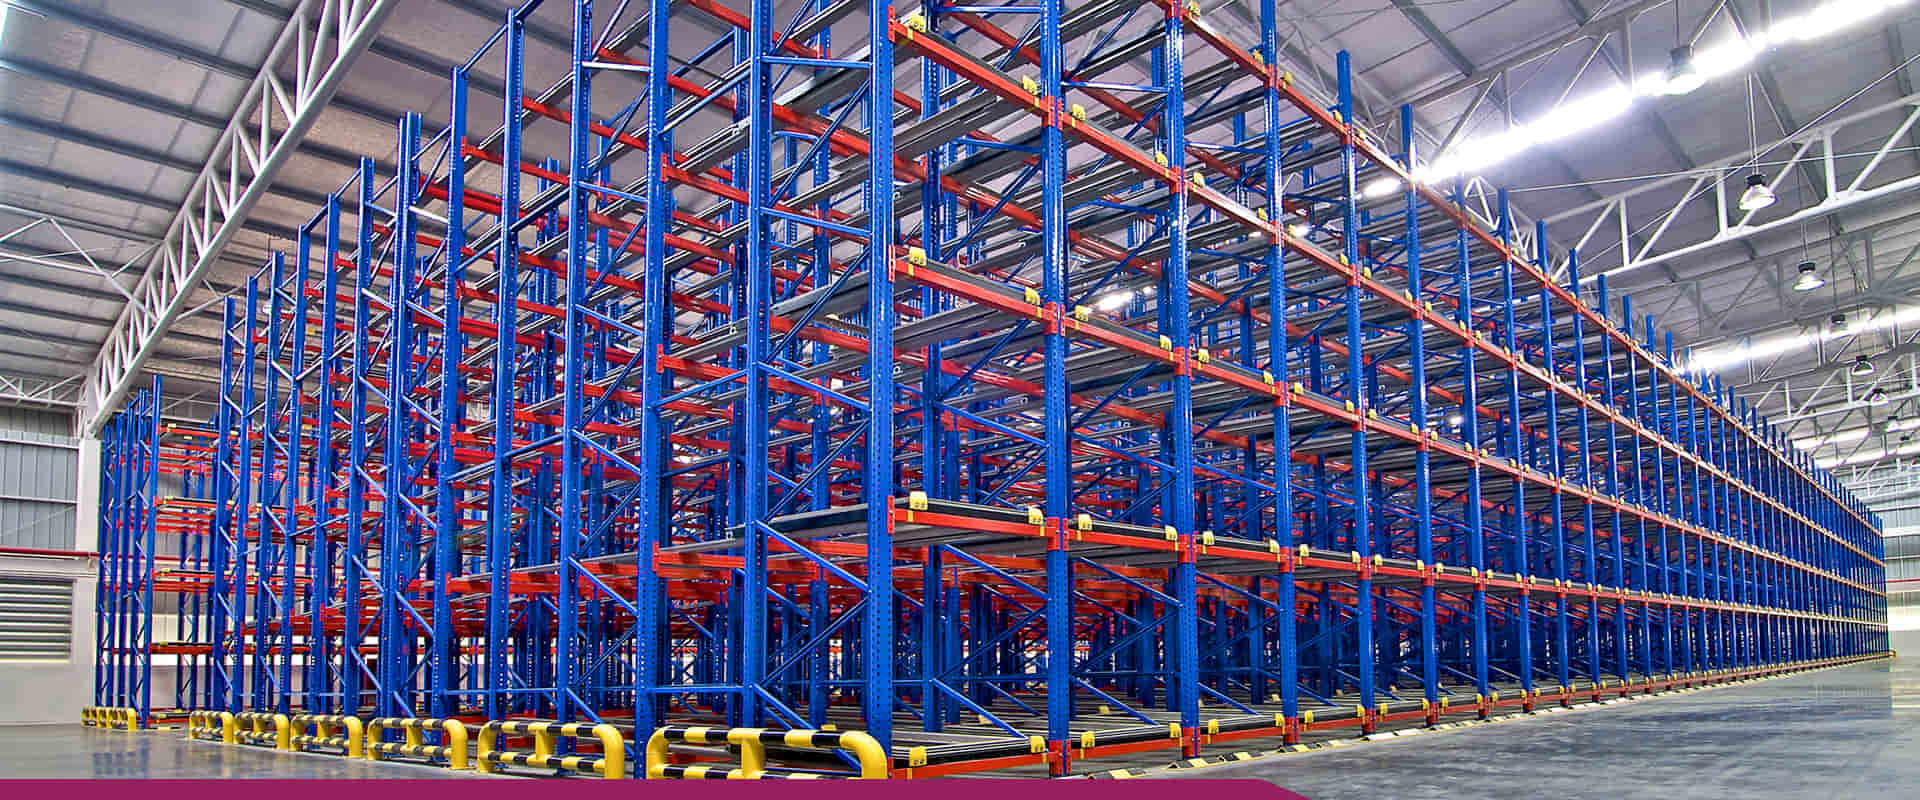 India’s Top Warehouse And Industrial Storage Racks Manufacturer In Hisar